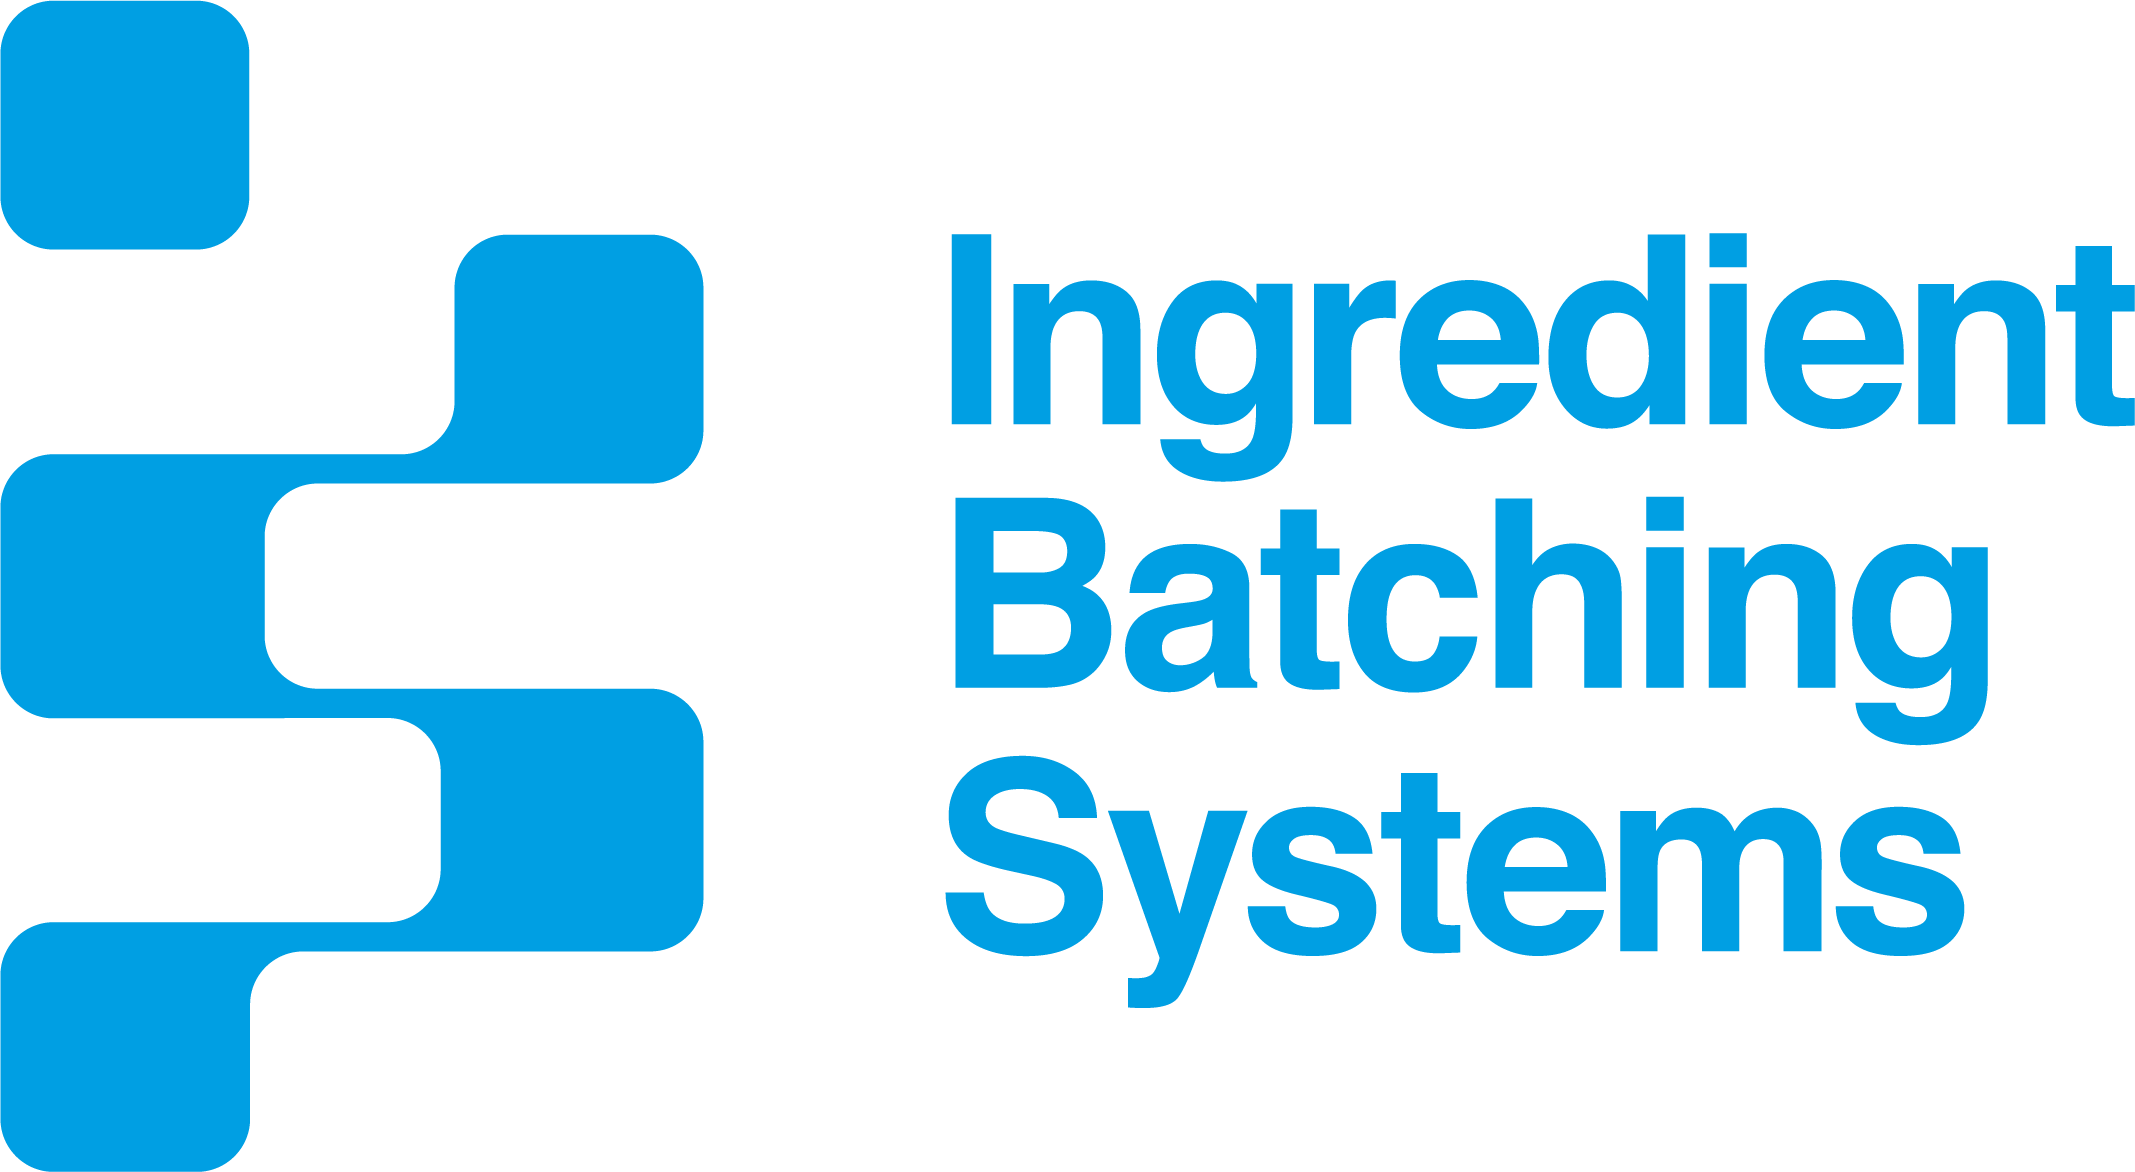 Ingredient Batching Systems